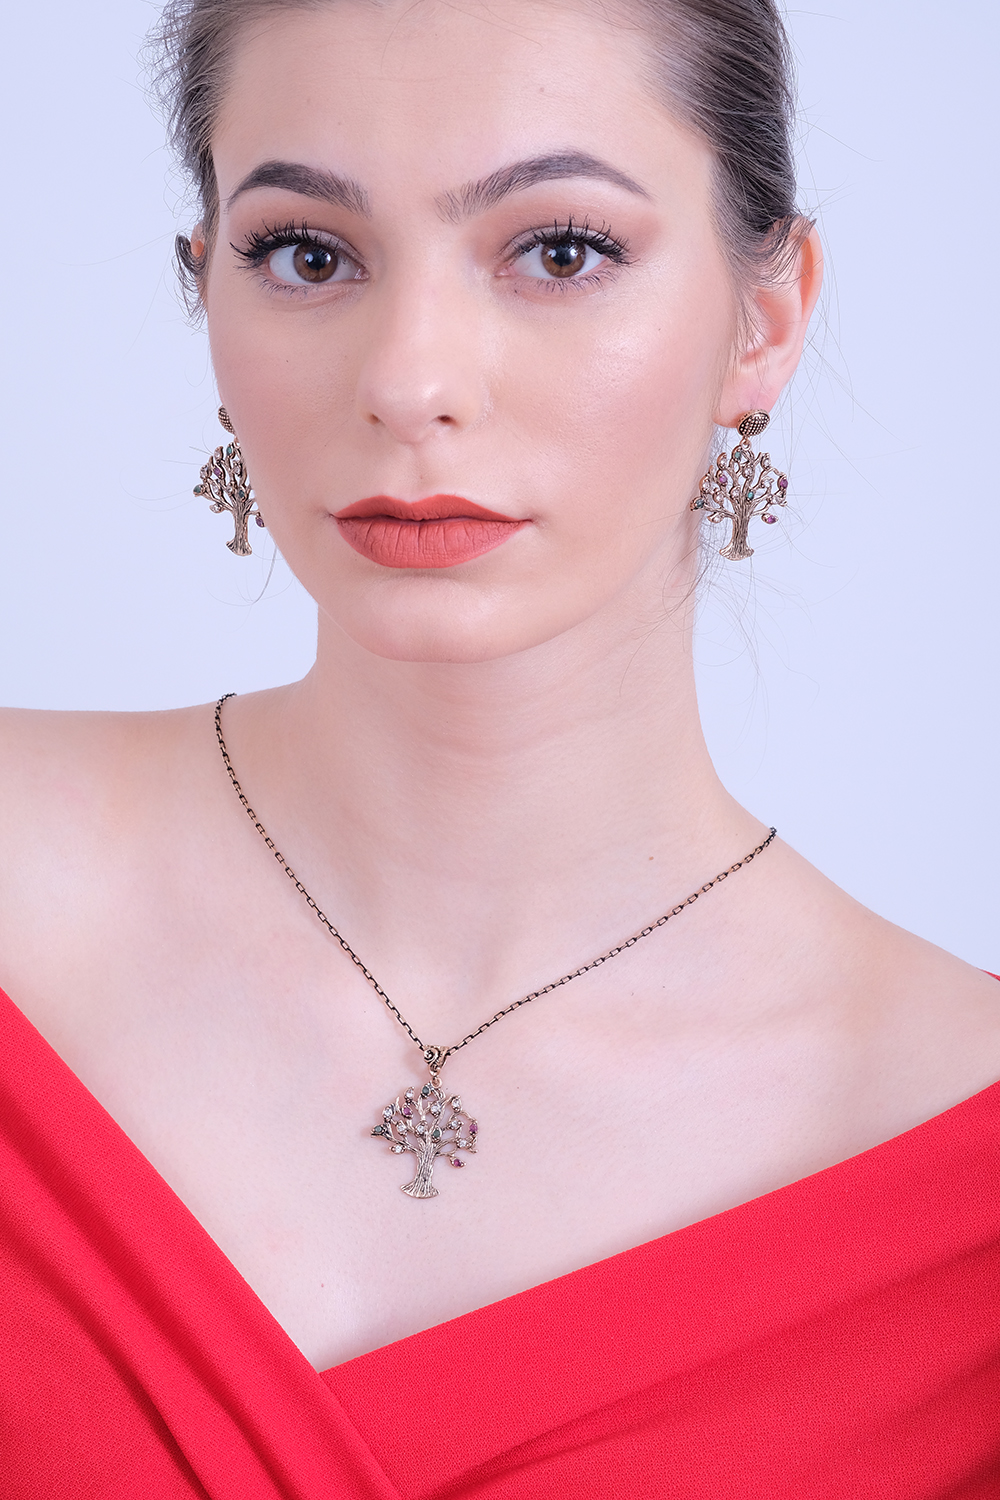 TREE OF YOUTH Necklace and Earrings Jewelry Set